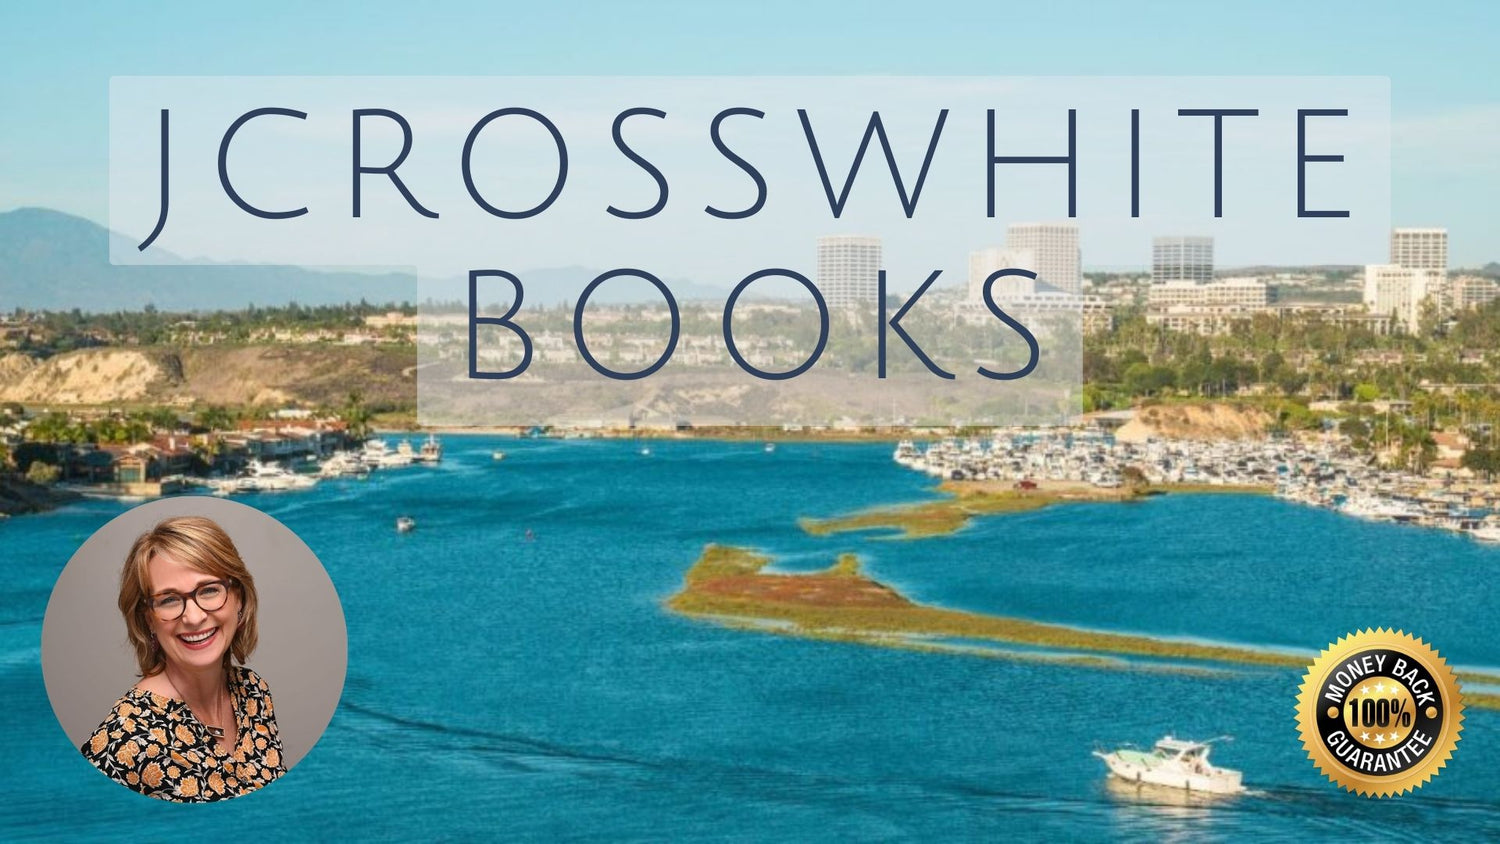 Header image for JCrosswhite books. Newport Beach image with a headshot of Jennifer Crosswhite and a money-back guarantee symbol